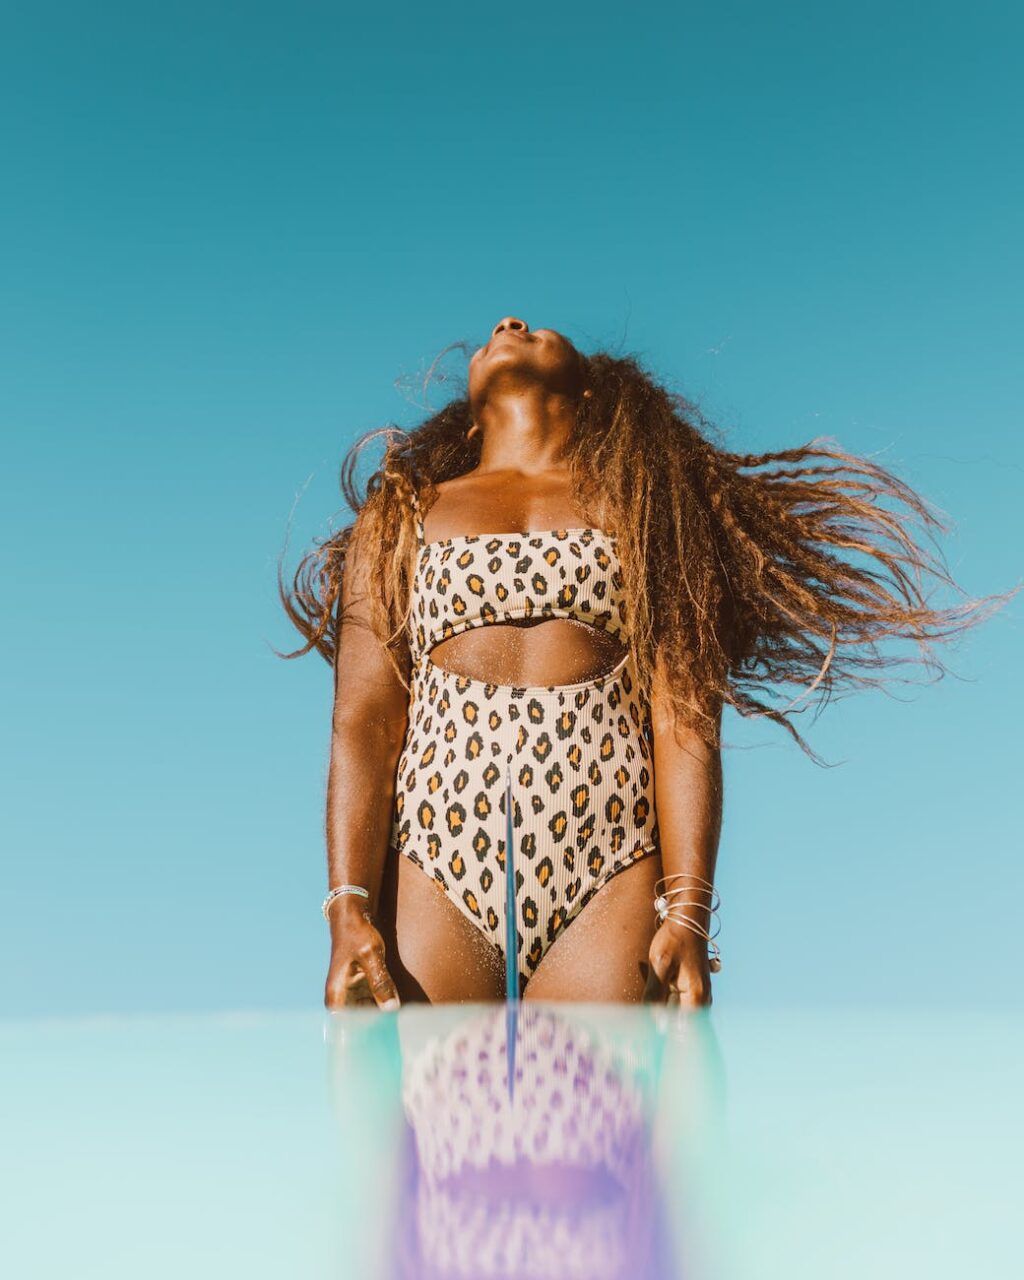 woman in a swimming suit throwing her head back